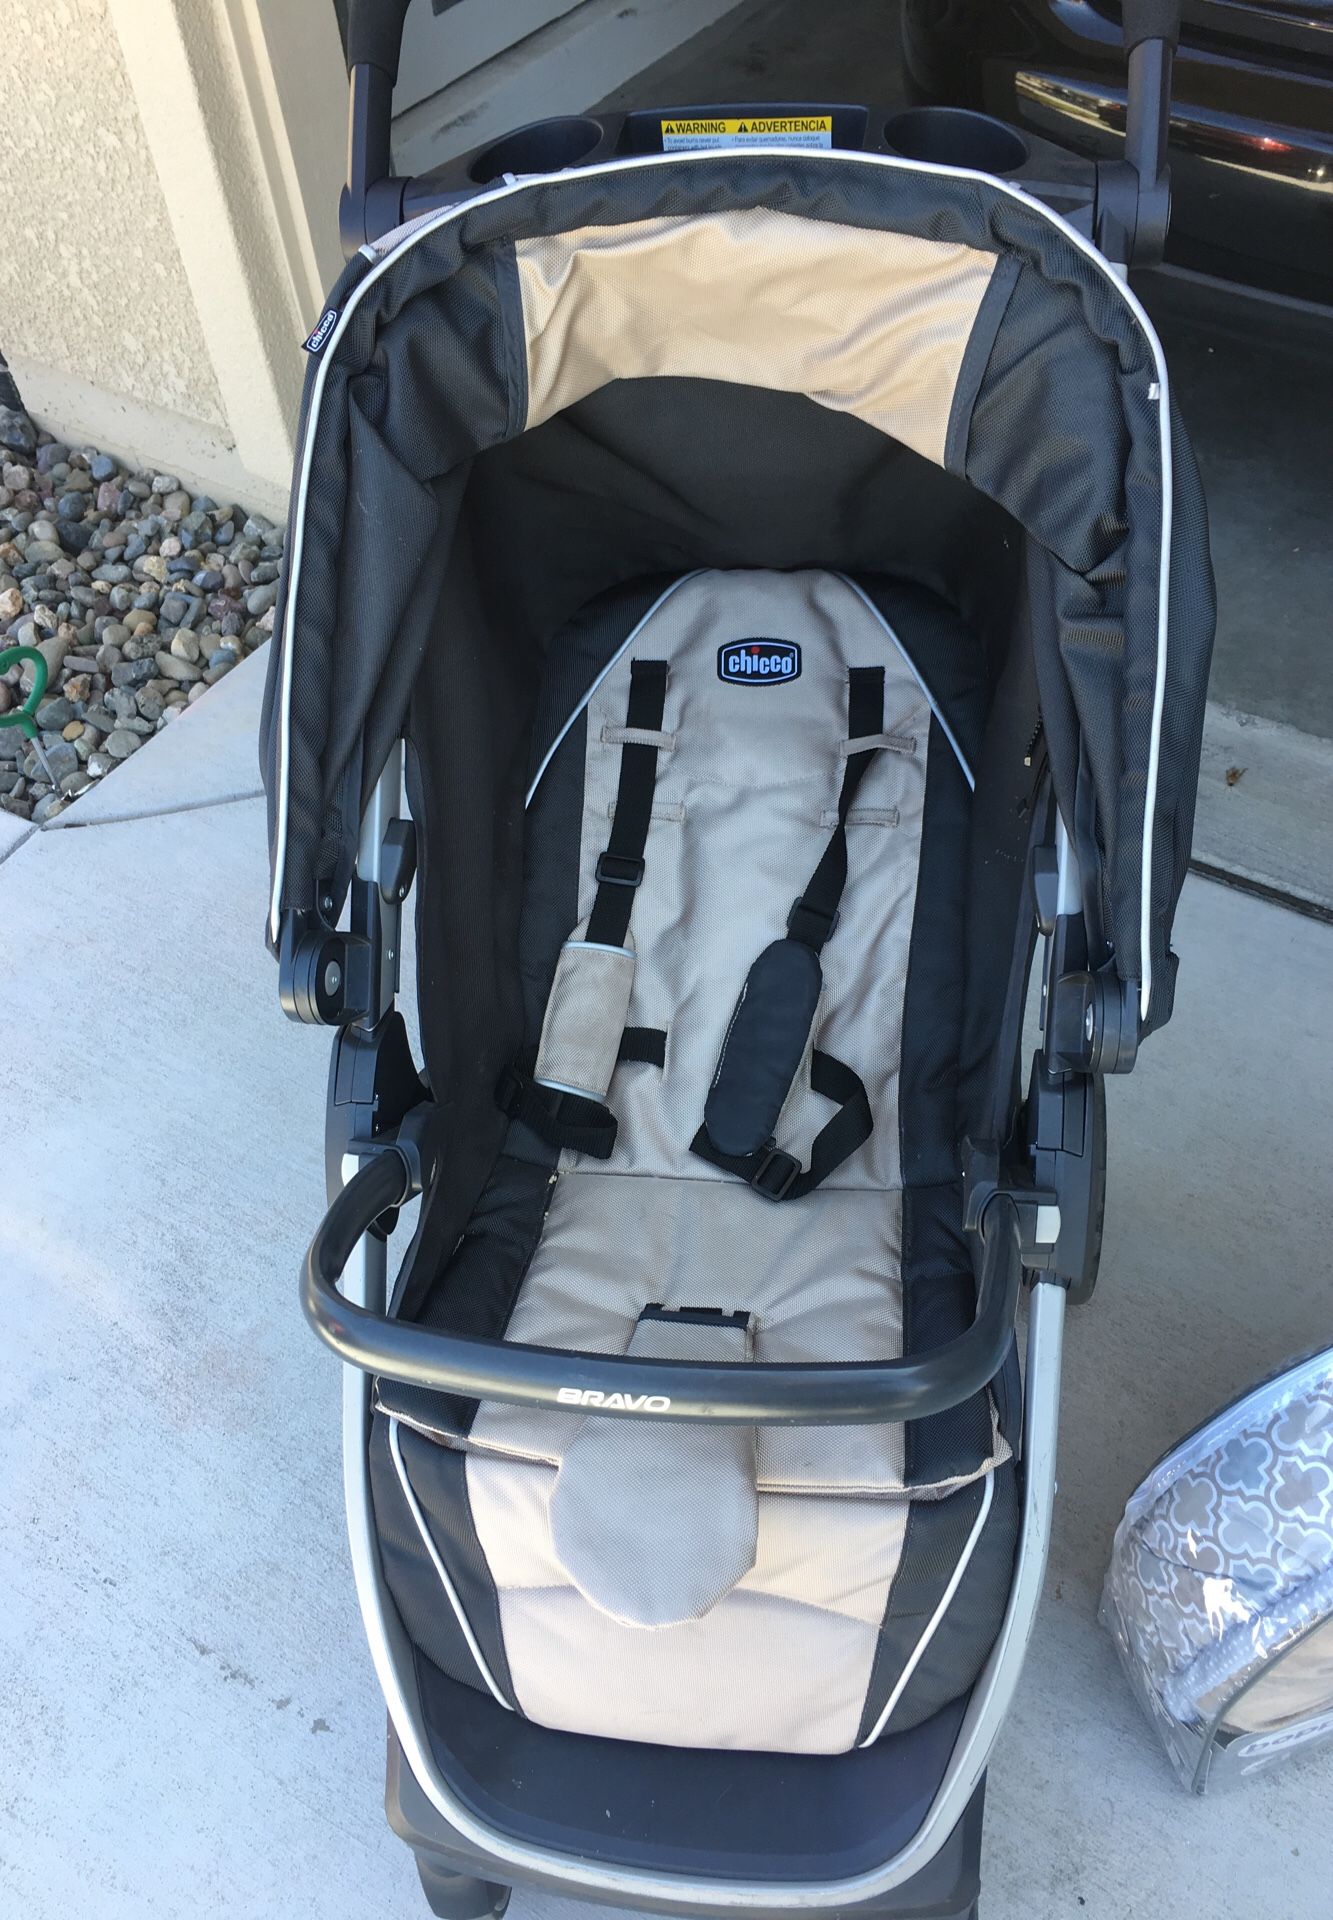 Chicco lightly used car seat and stroller. Boppy infant pillow and snoogle. Barely used.